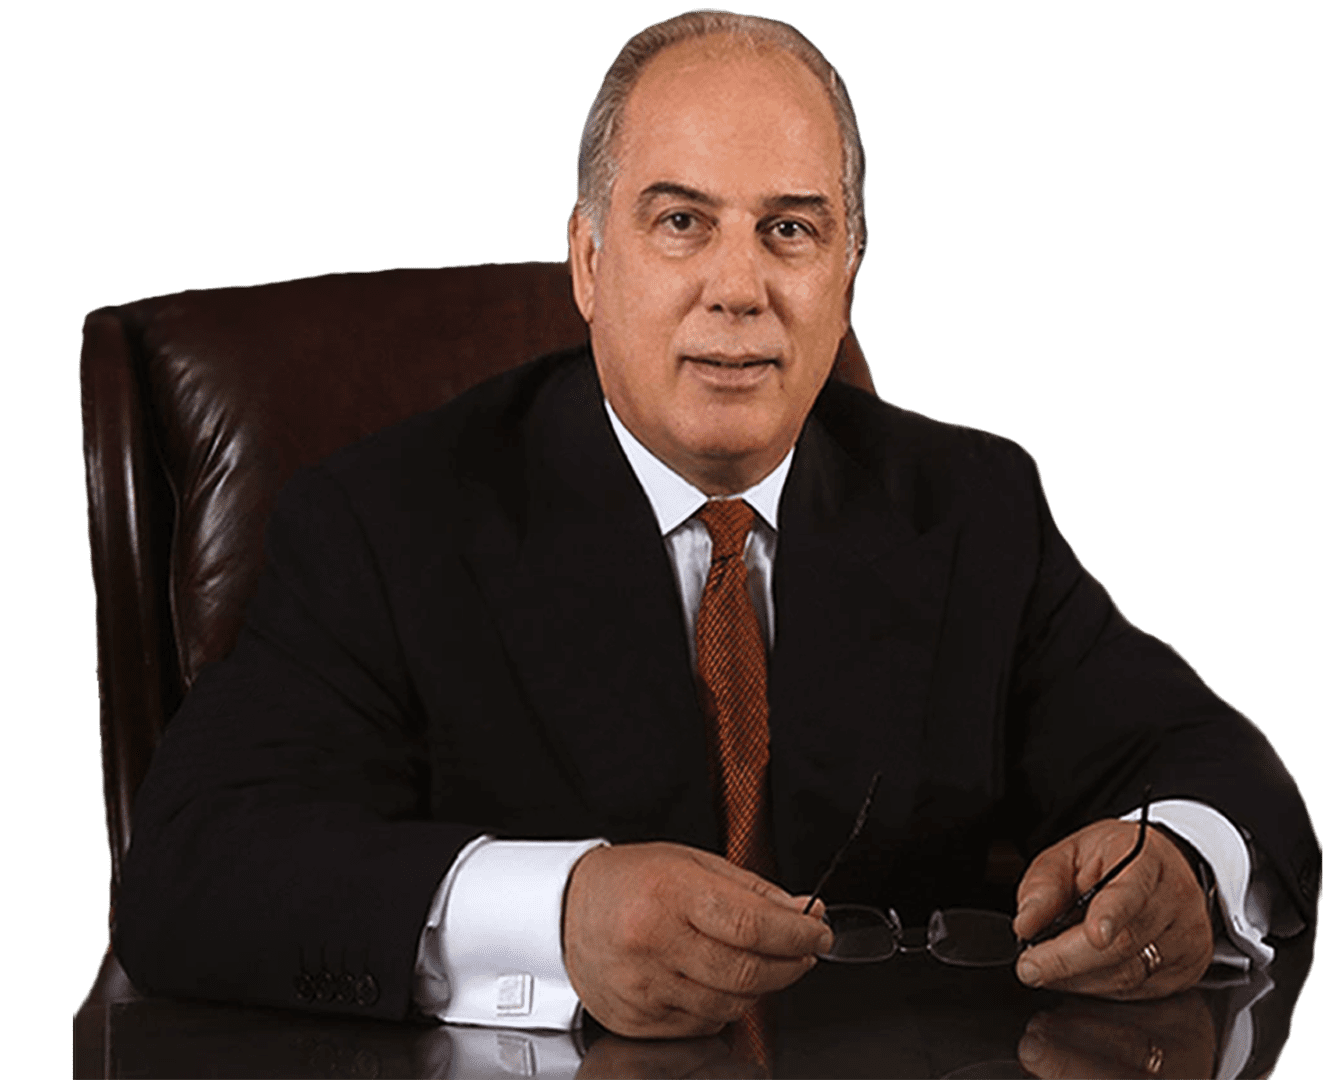 wrongful death and personal injury specialist Frank Giunta